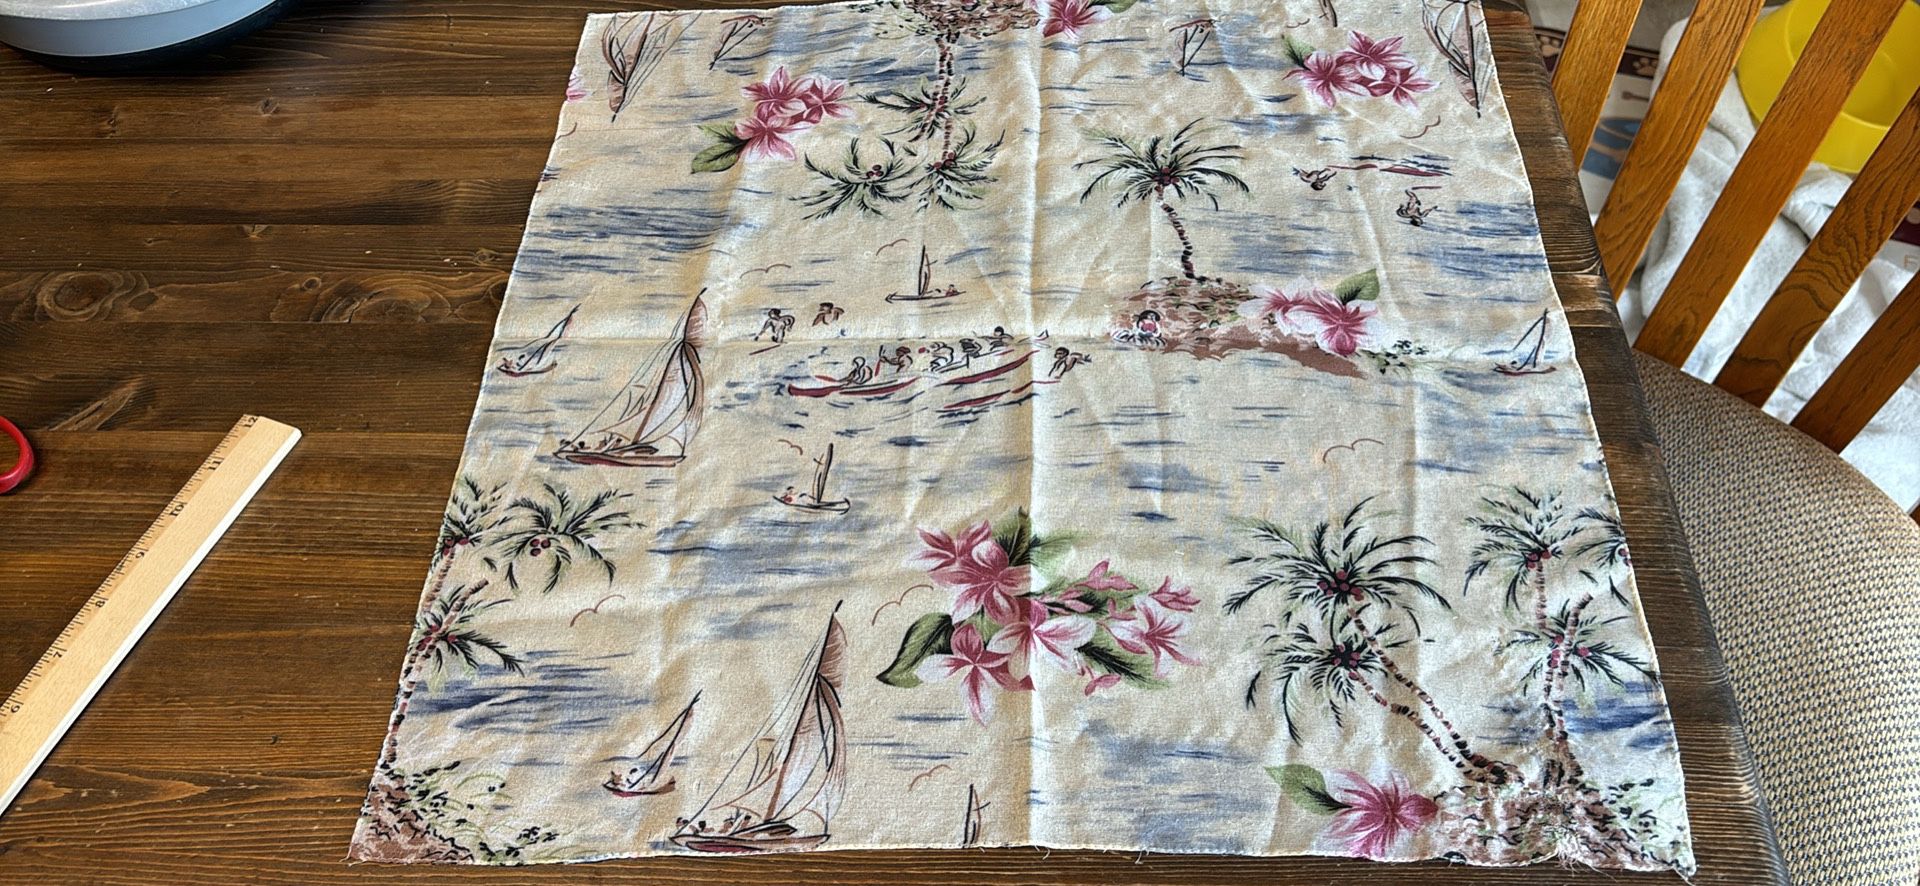 You Get 2! Vintage 60’s 70’s Scarves Salmon Neck Scarf And 19x19 Square Tropical Theme Scarf